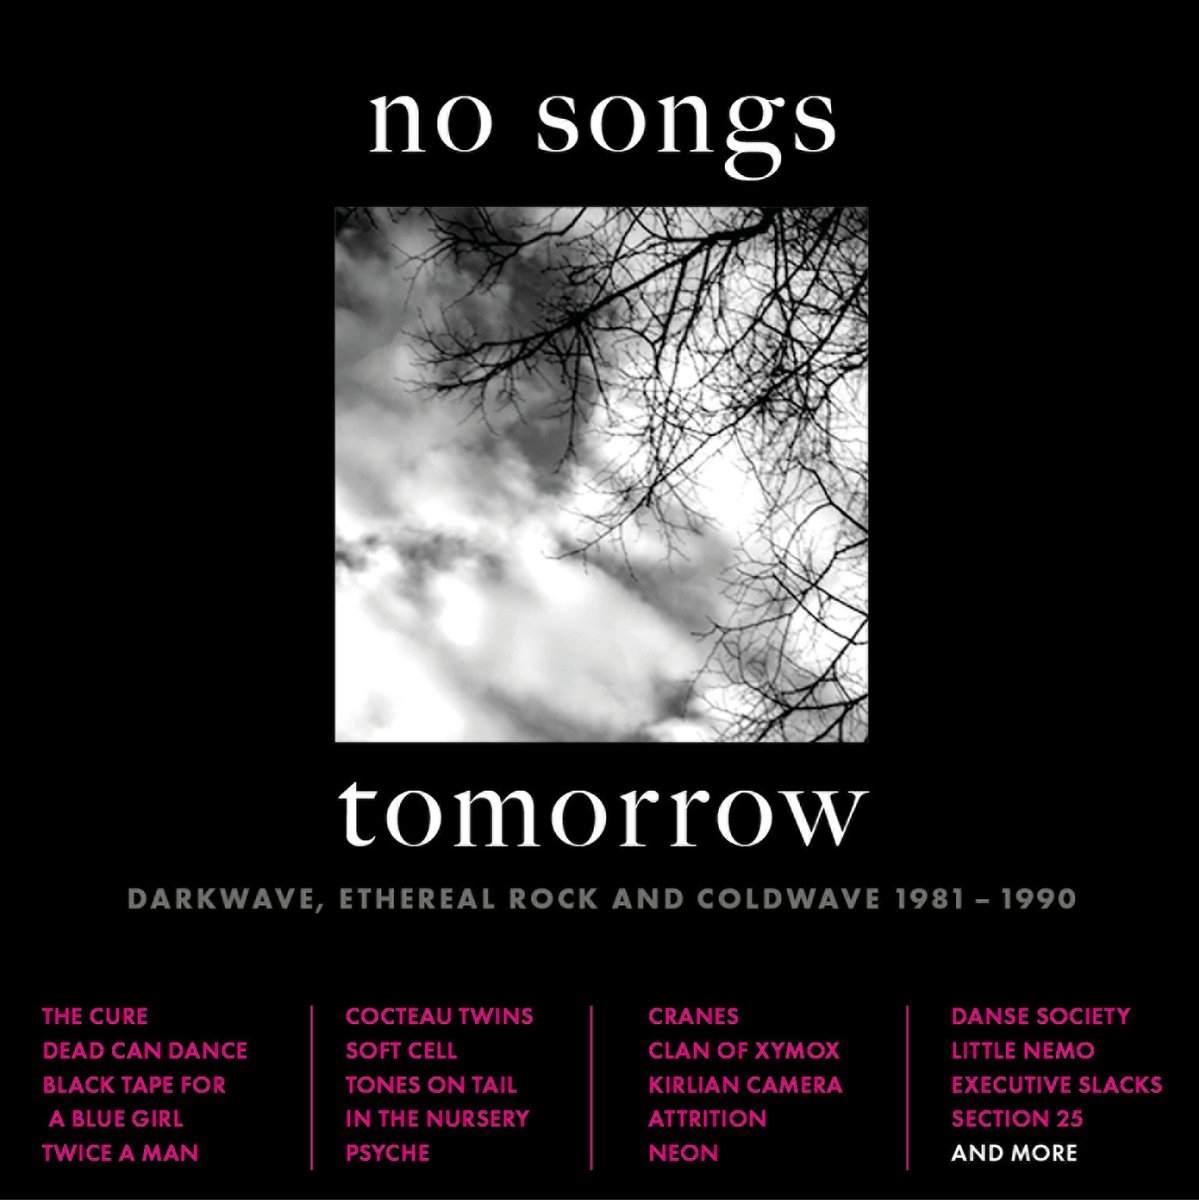 Various Artists - No Songs Tomorrow - Darkwave, Ethereal Rock & Coldwave 1981-1990 CD preorders shipped, now in stock.

burningshed.com/tag/Various_Ar…